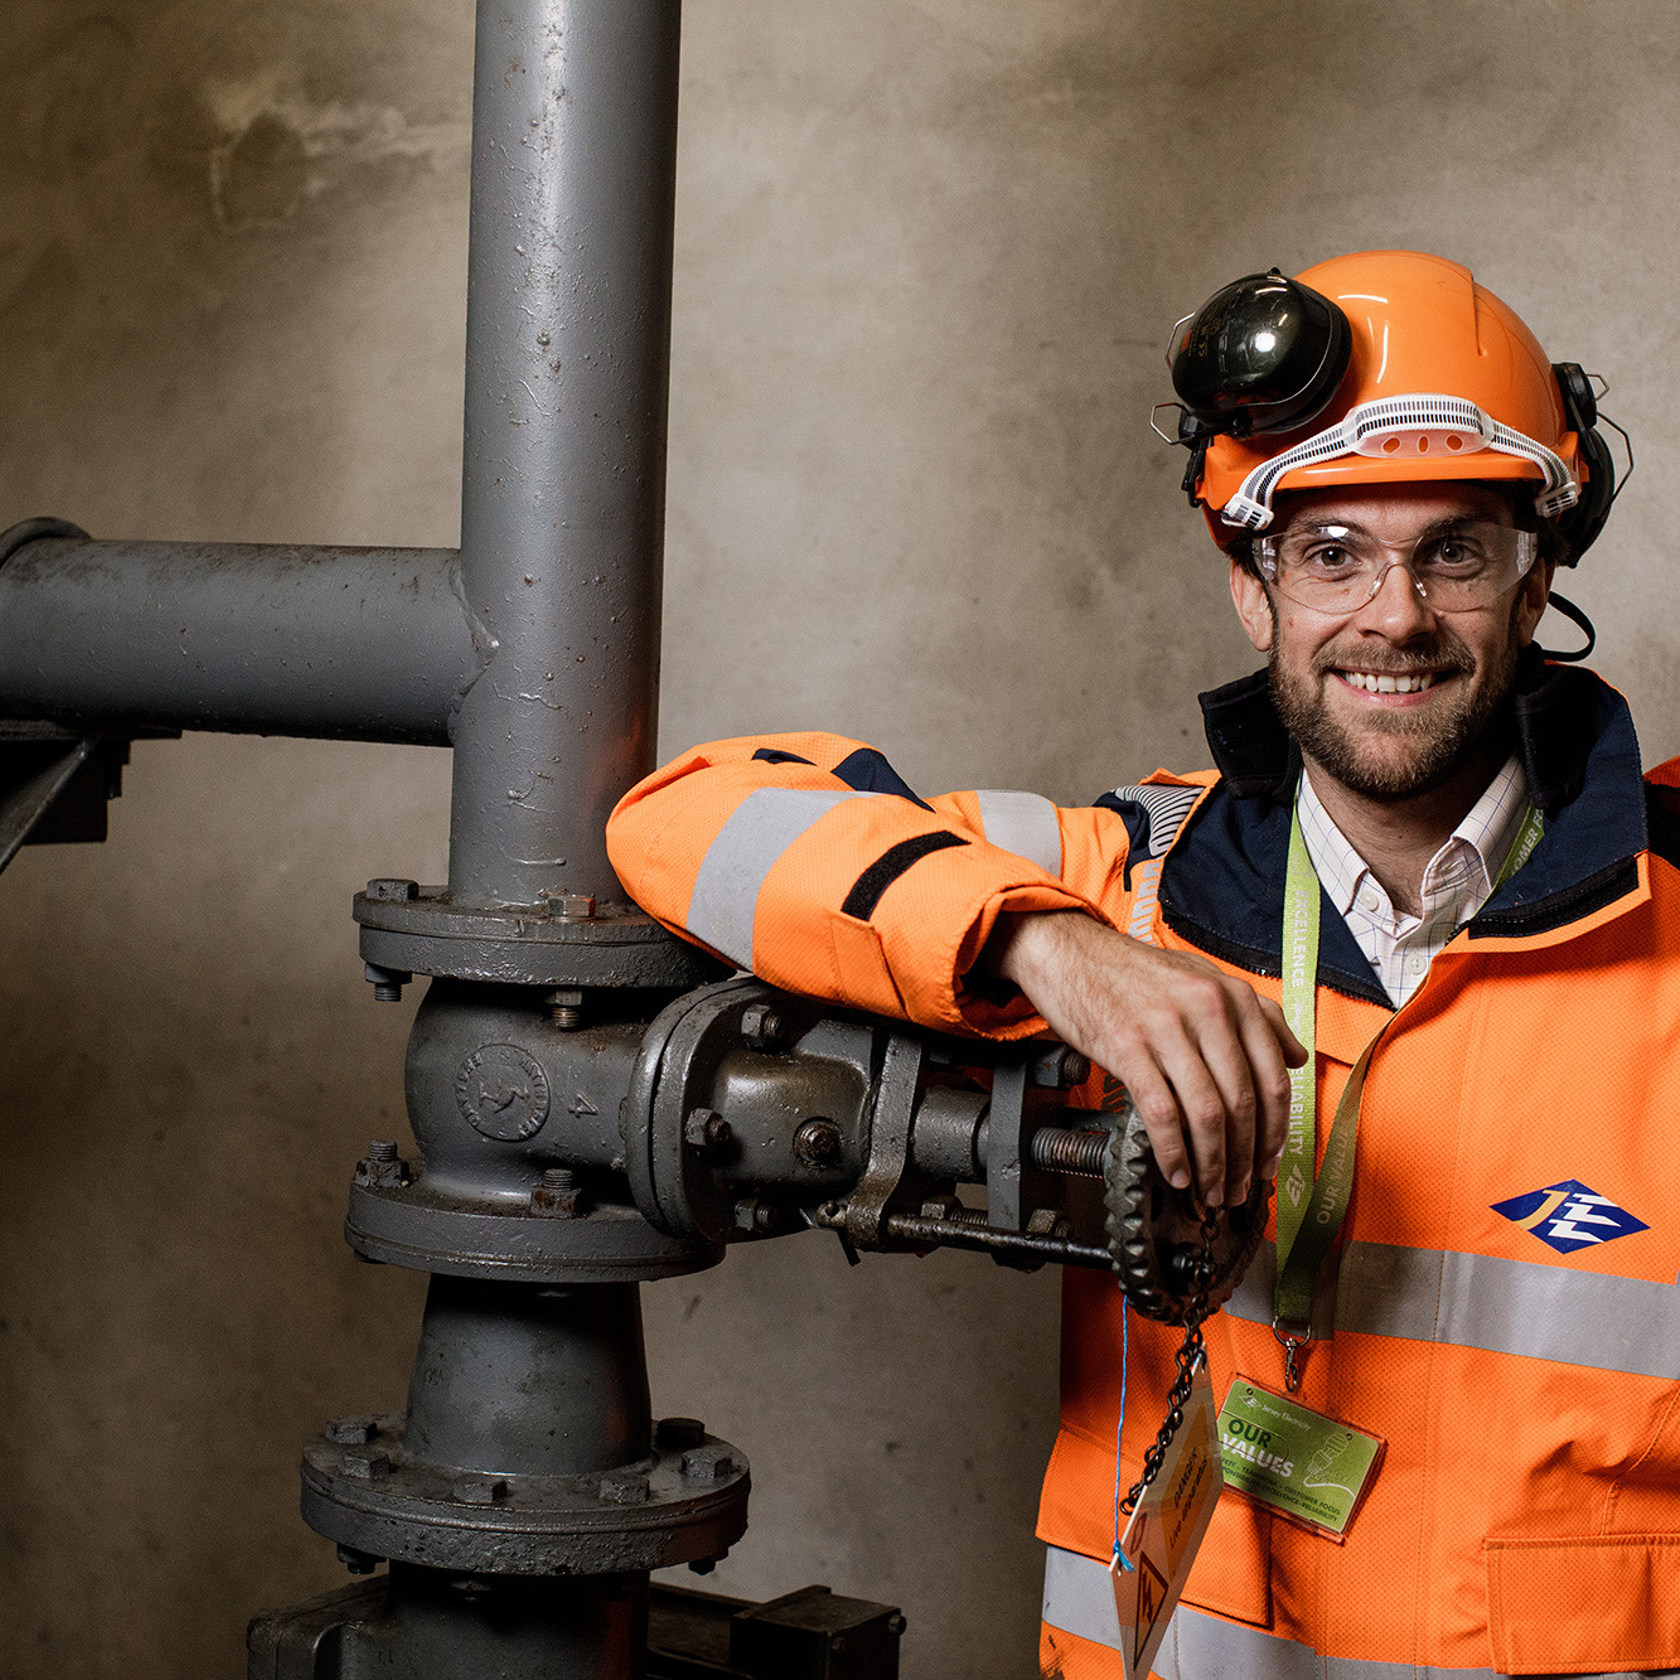 Jersey Electricity engineer, Sam Boleat is pictured next to pipework.